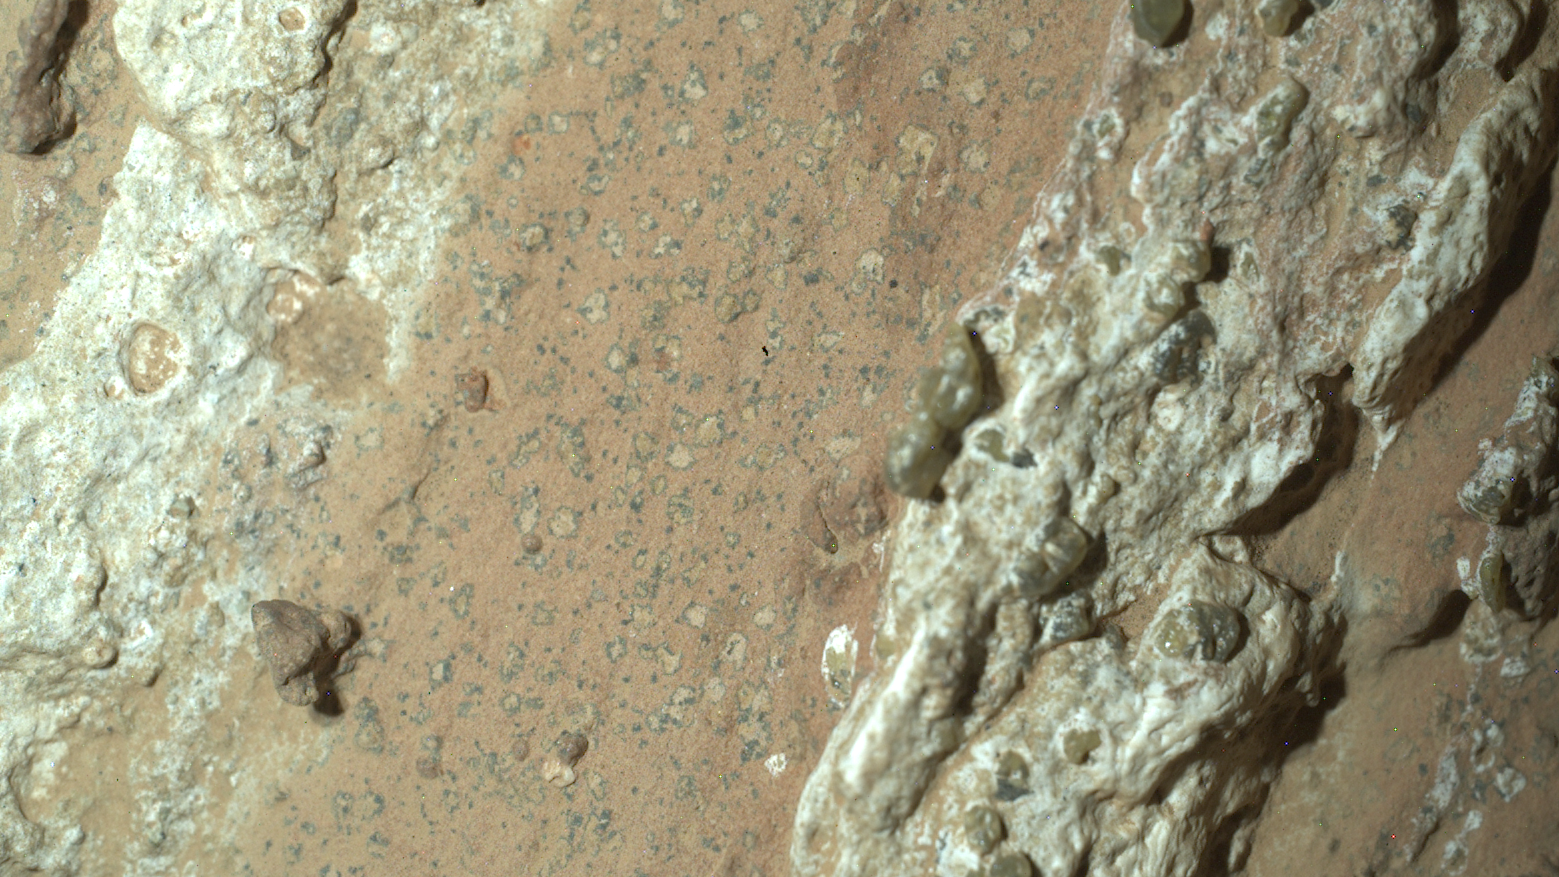 A brownish rock close up. There's a strip of lighter material toward the left and darker material toward the right. There are also darker speckles in the reddish brown center material.